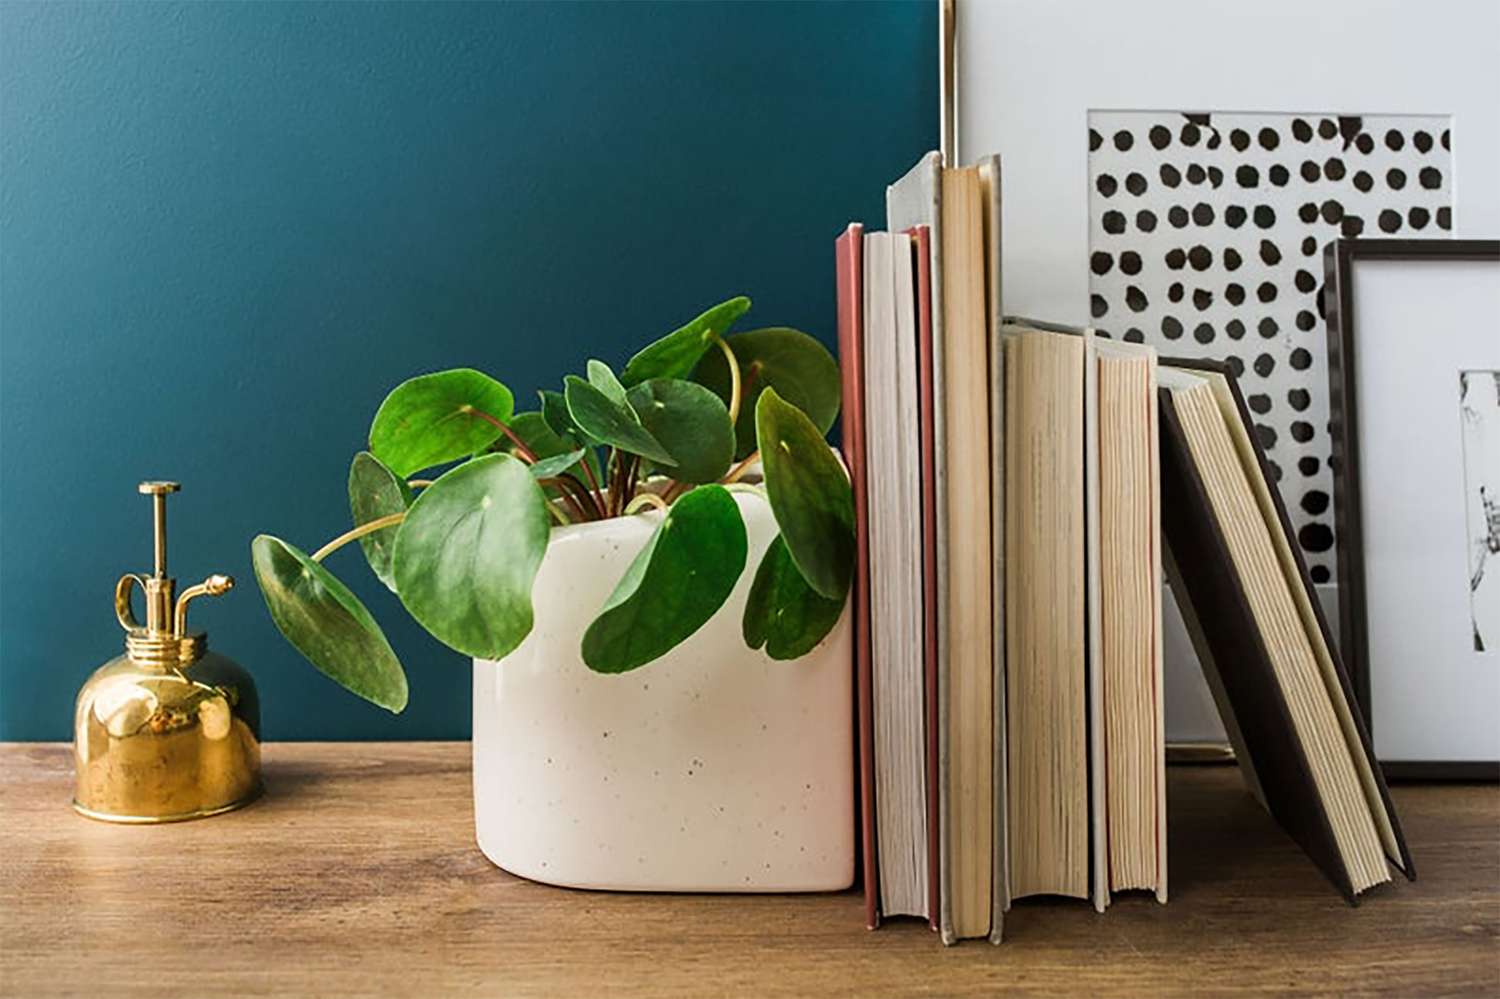 STAKCERAMICS planter bookend with house plant holding up books on shelf